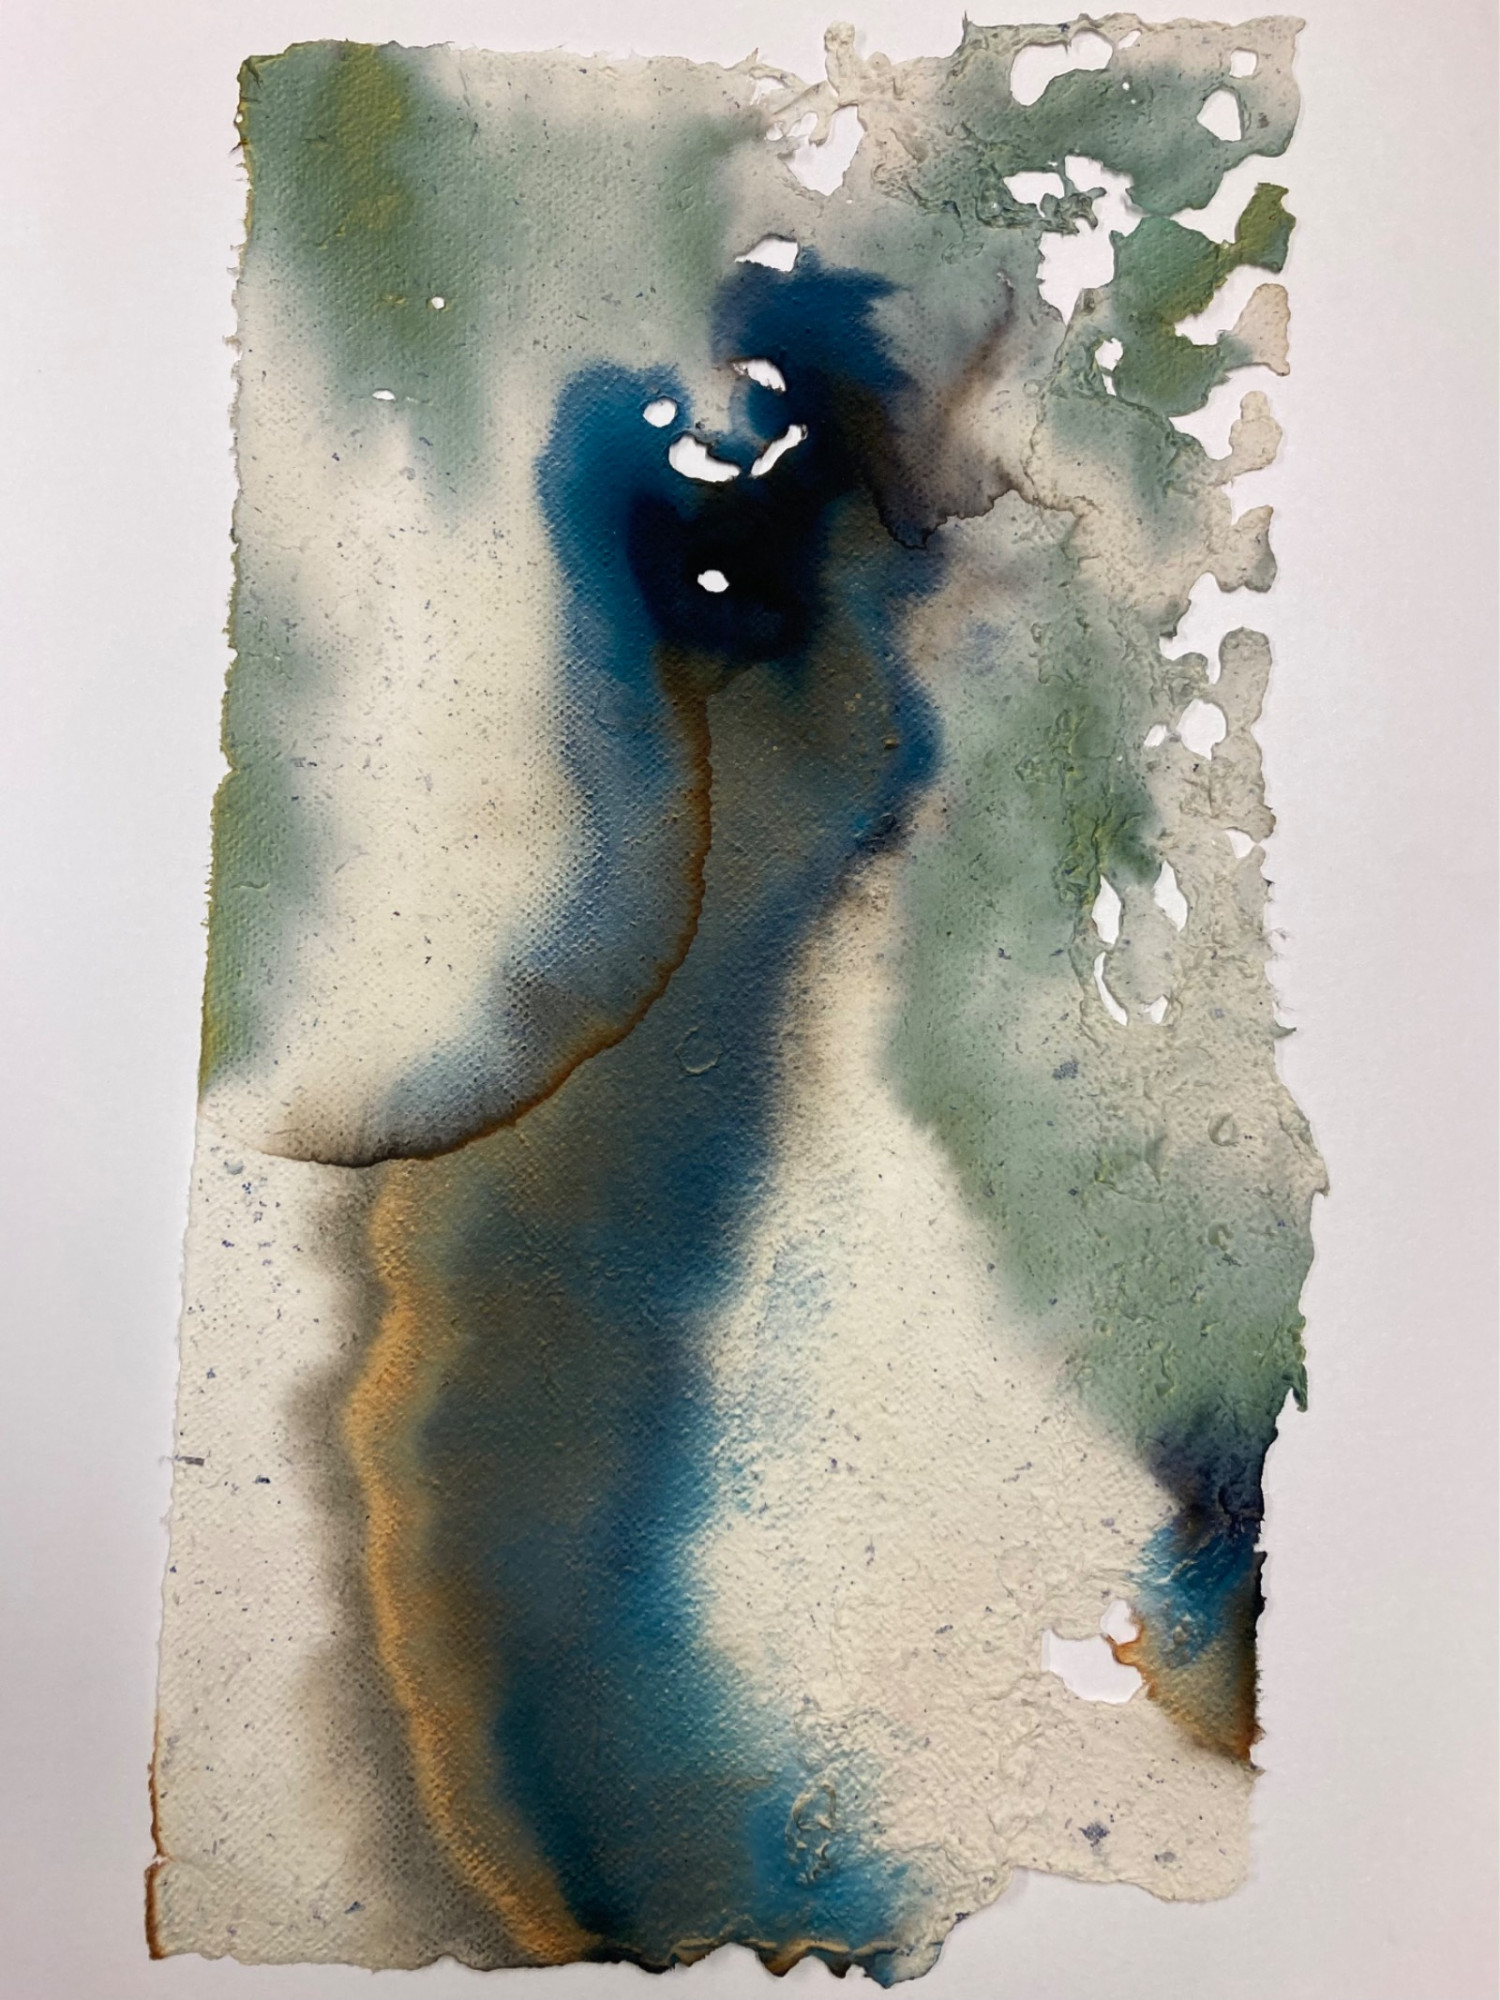 *Every body    has to*, handmade paper using cyanotype and collected fragments of nature, 41 x 58cm